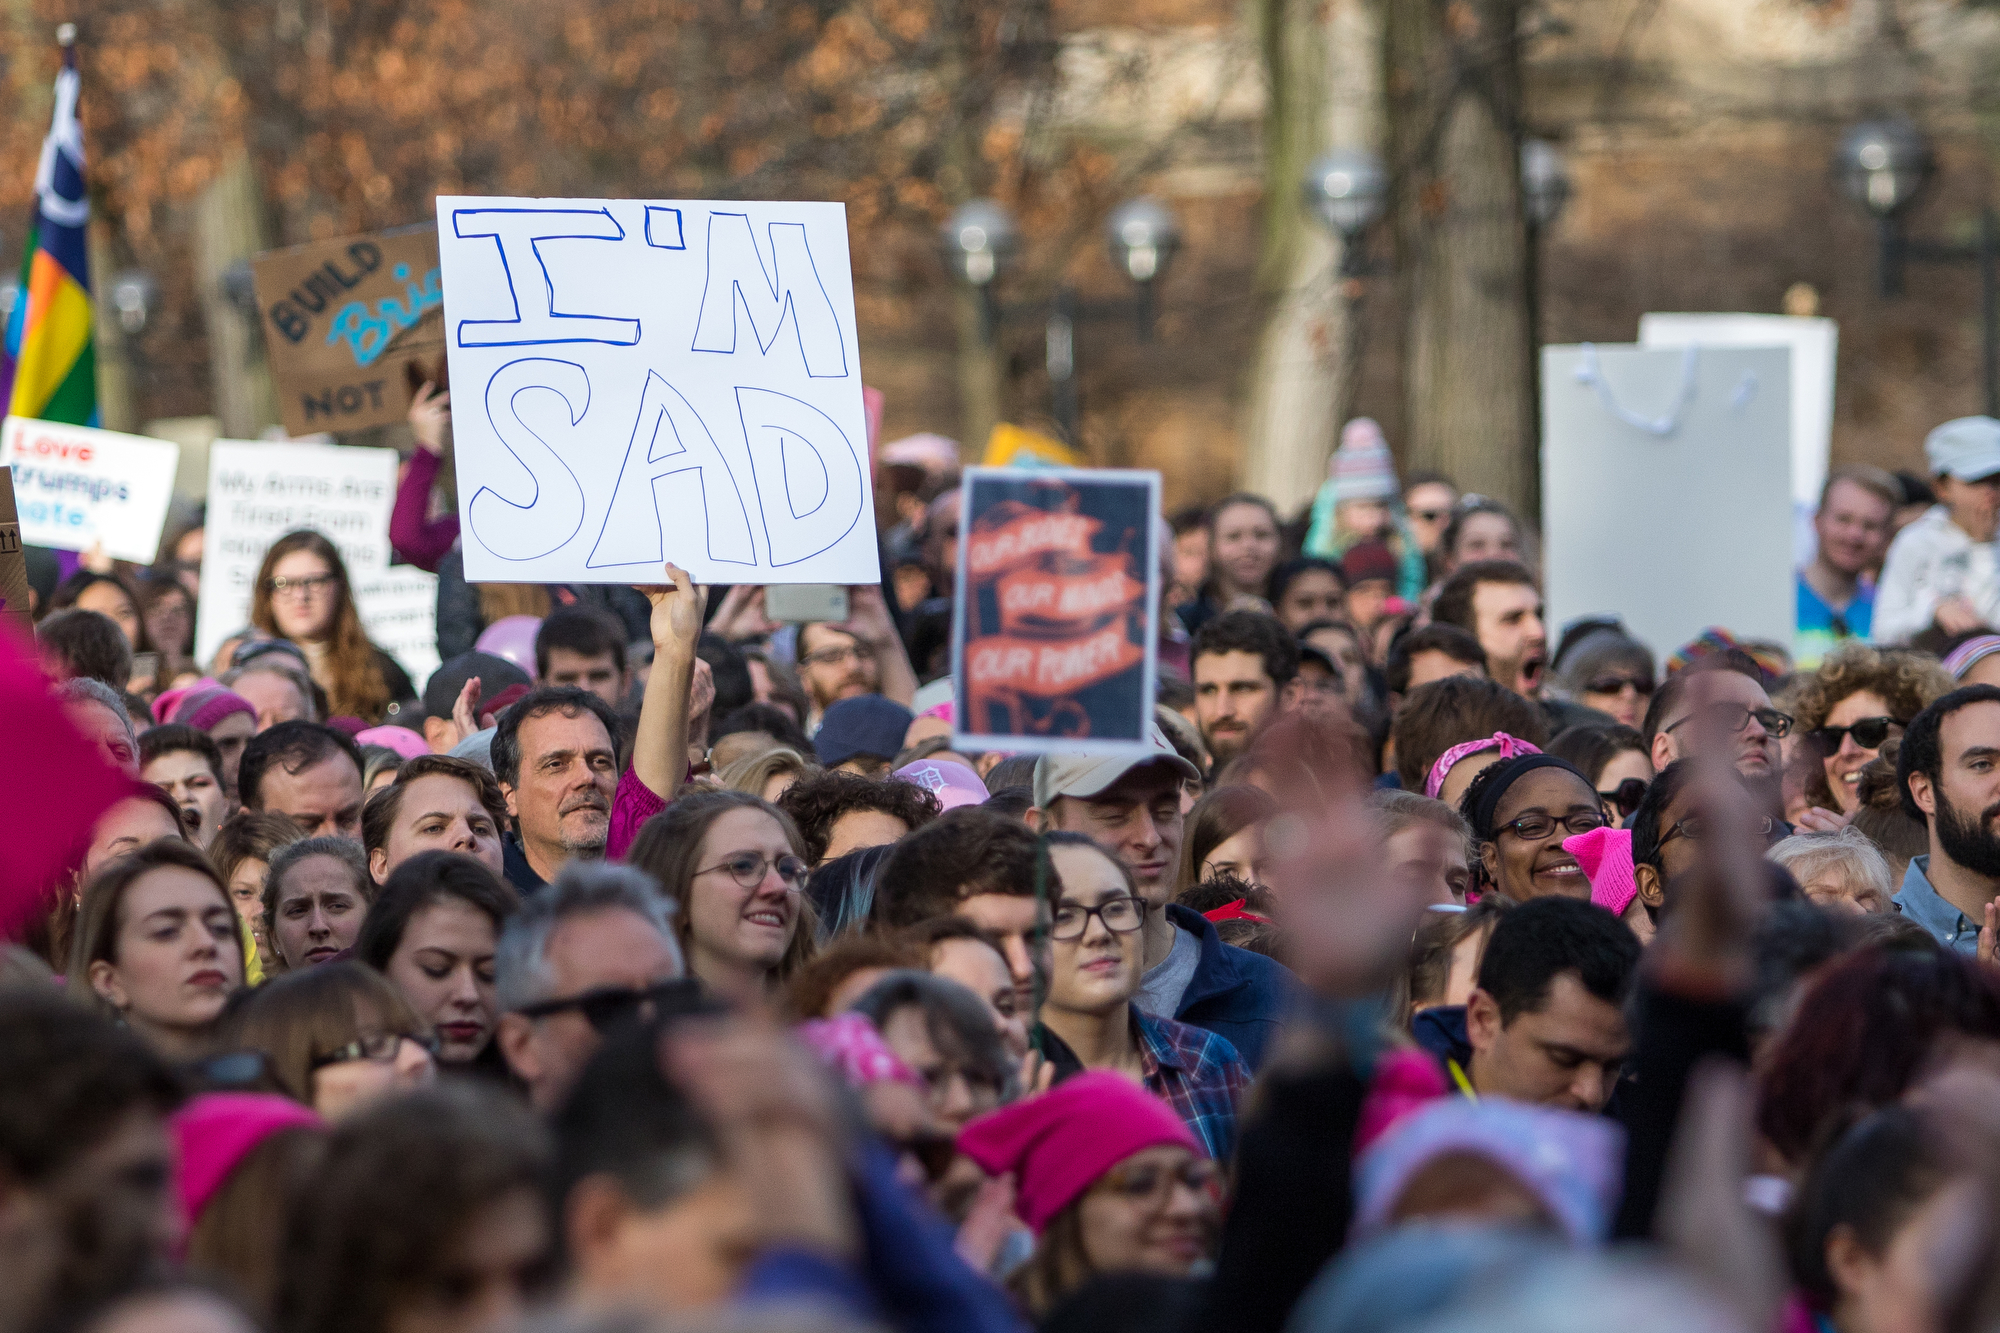  Thousands gather at the Diag at the University of Michigan during the Women's March on Saturday, January 21, 2017.  The march was one of several throughout the country and drew over 6,000 people. Matt Weigand | The Ann Arbor News 